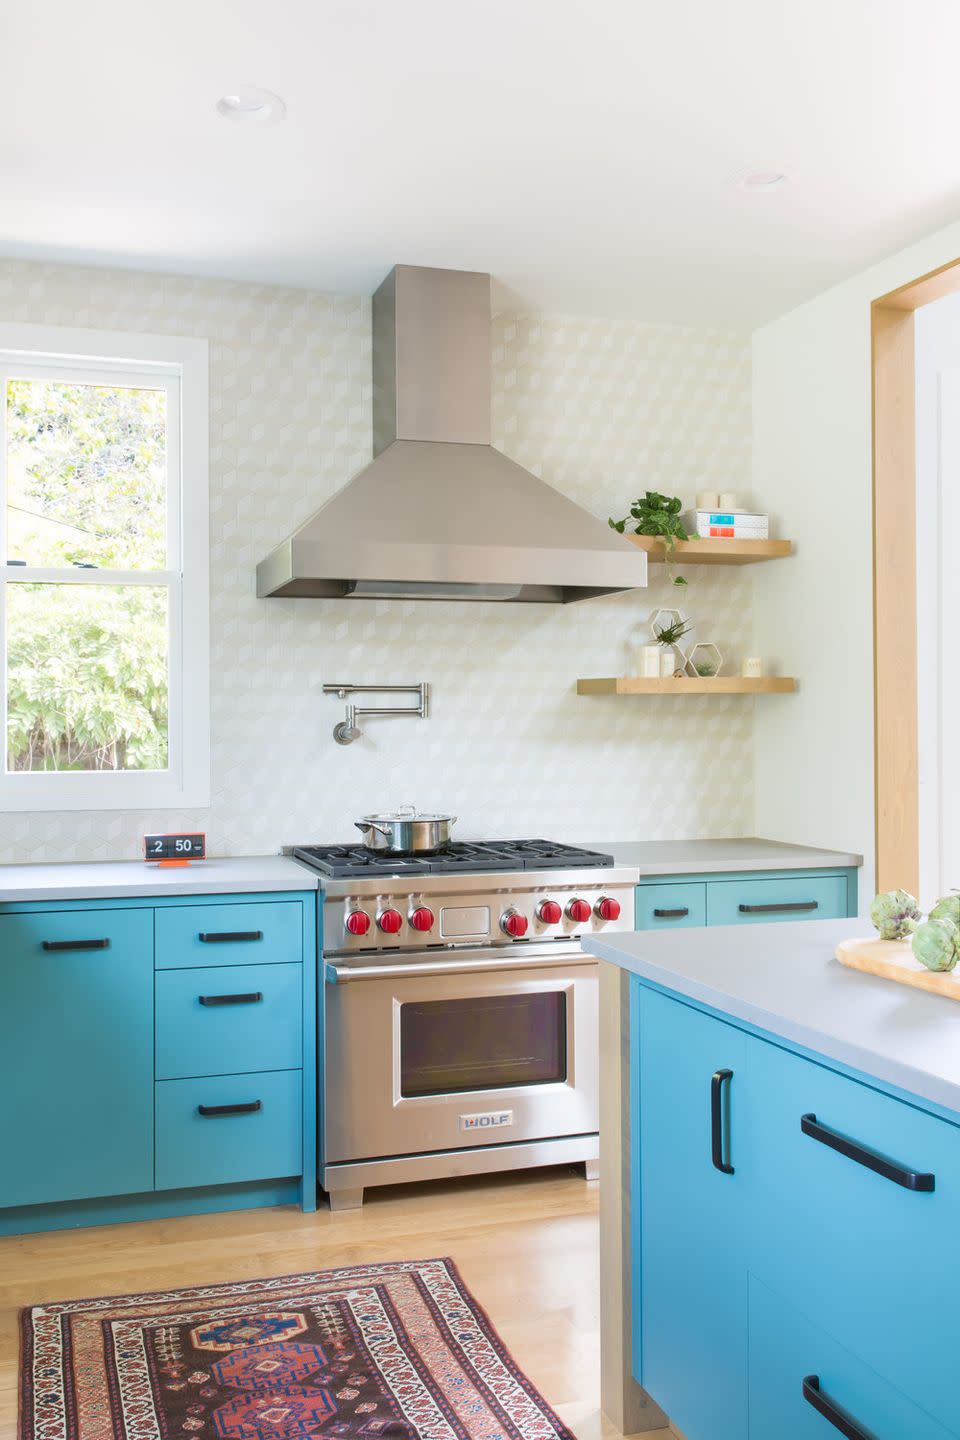 10 Rooms That Made Great Use of Teal Paint